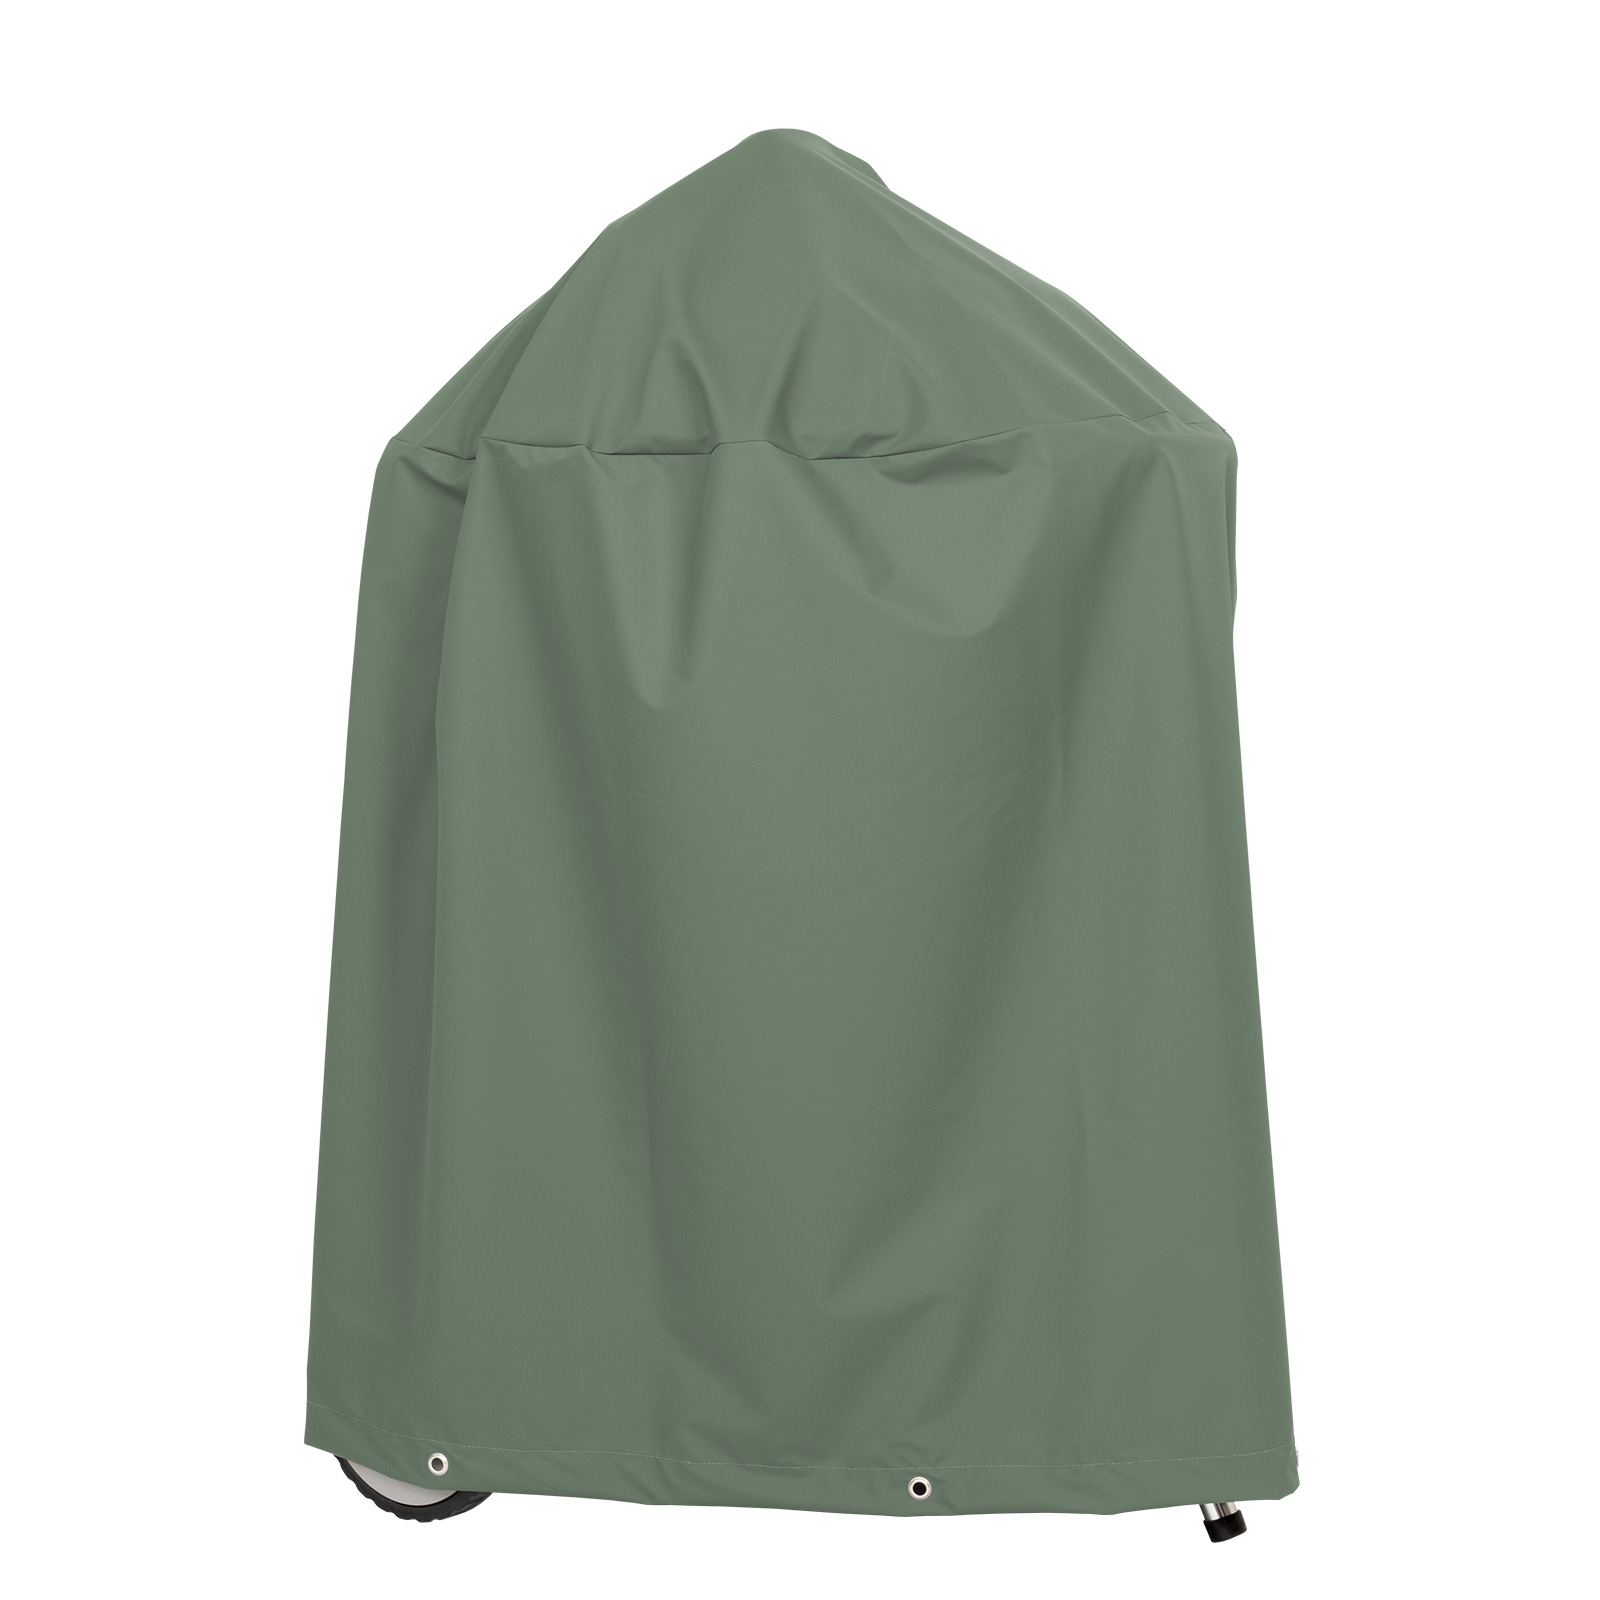 Weber barbecue cover